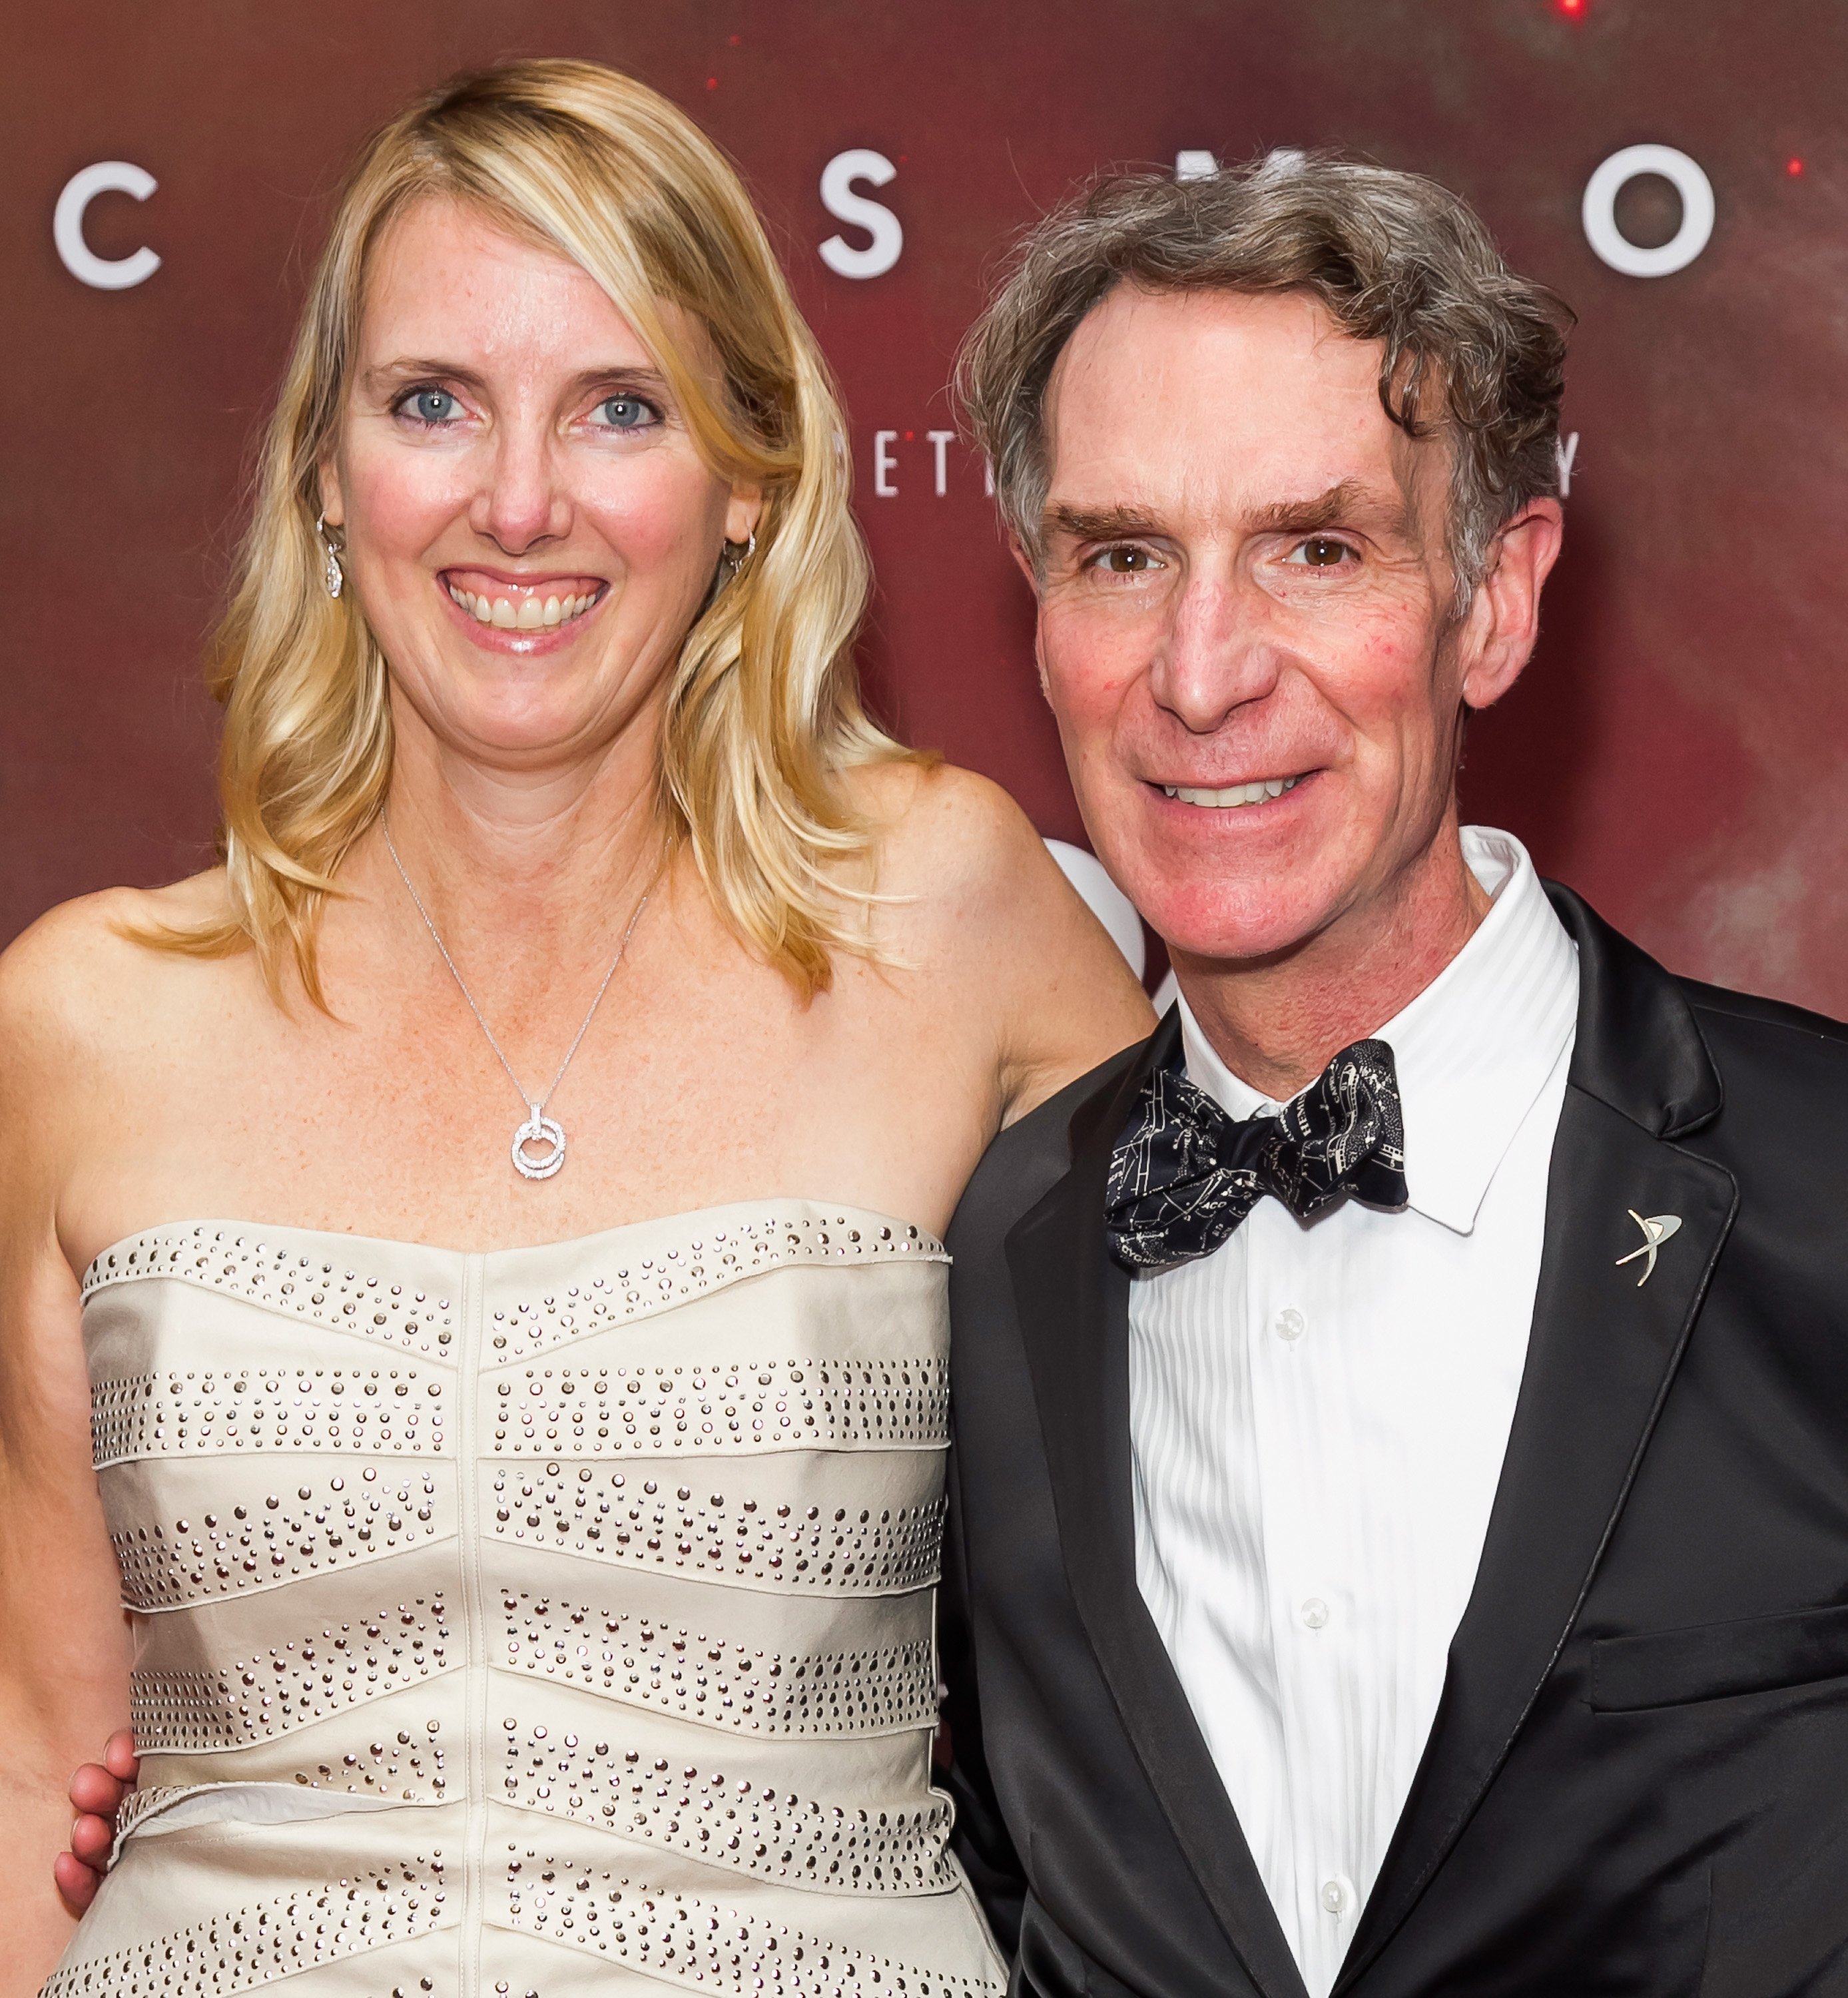 Oboist Blair Tindall and comedian Bill Nye at The Greek Theatre on March 4, 2014 in Los Angeles, California. | Source: Getty Images 